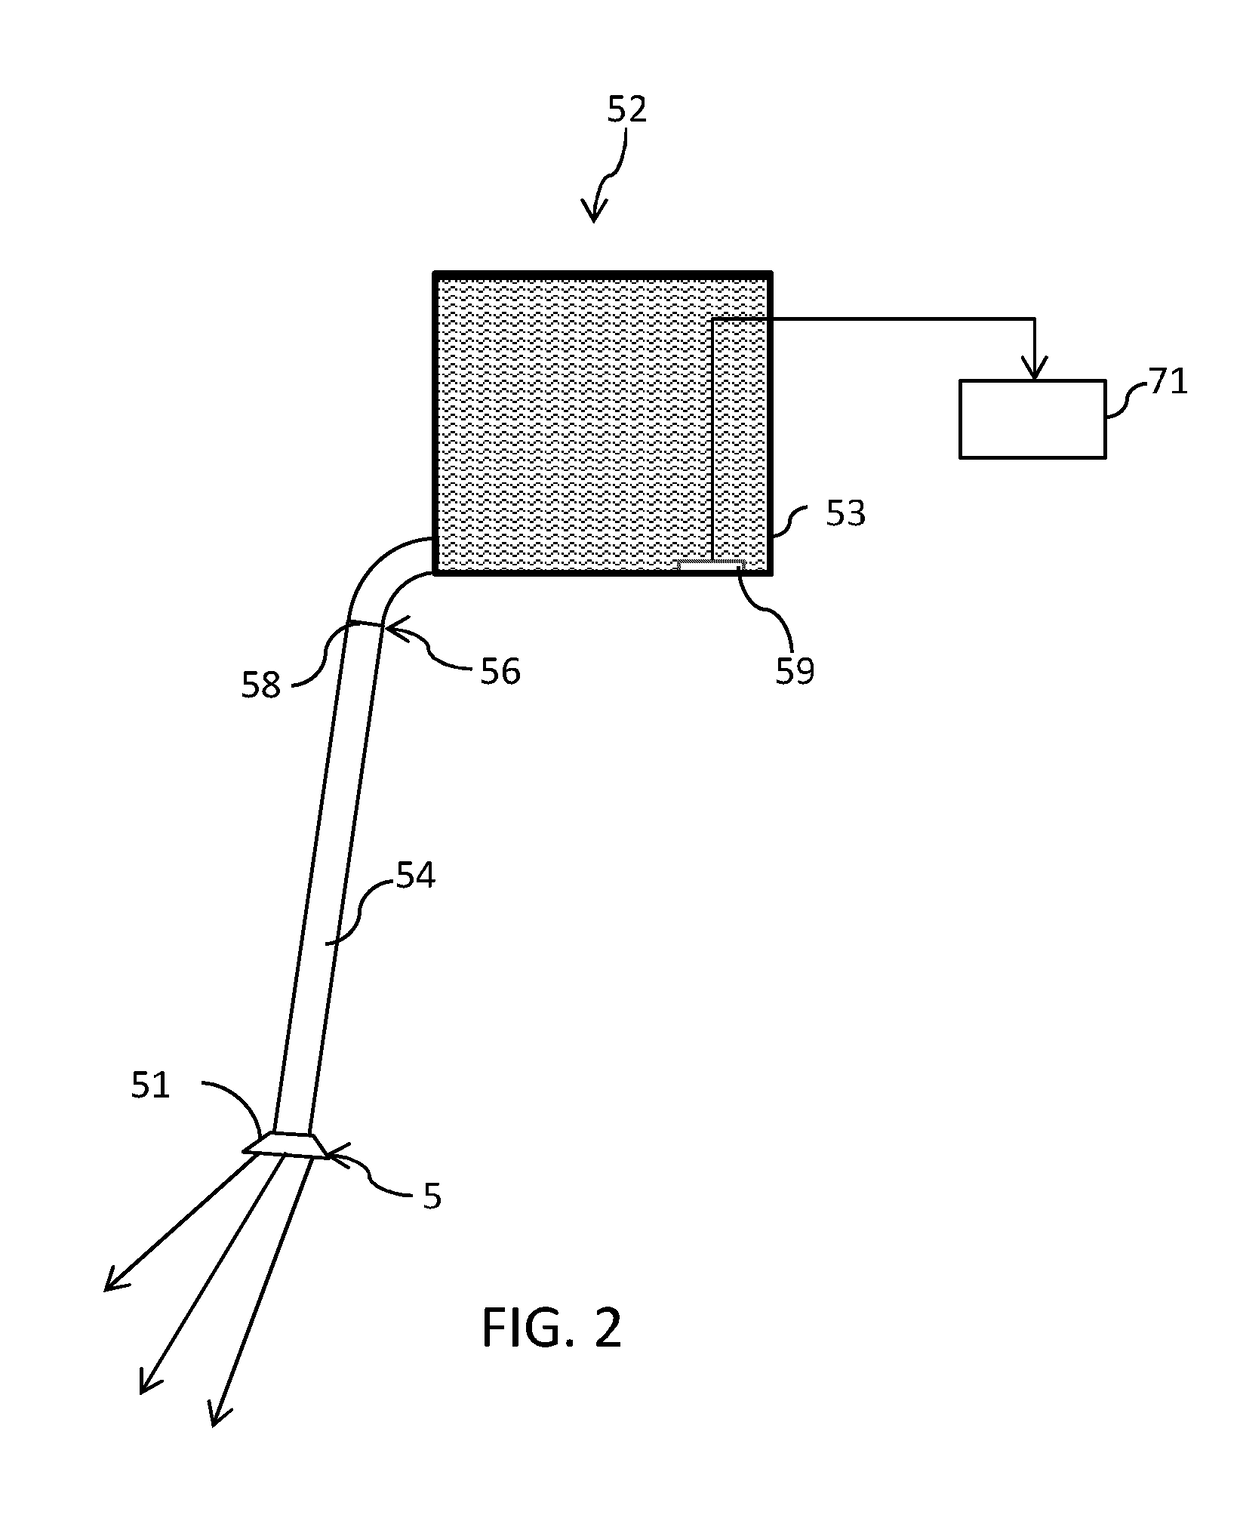 Apparatus and method for preparing food ingredients with hot air and fluid introduced thereinto